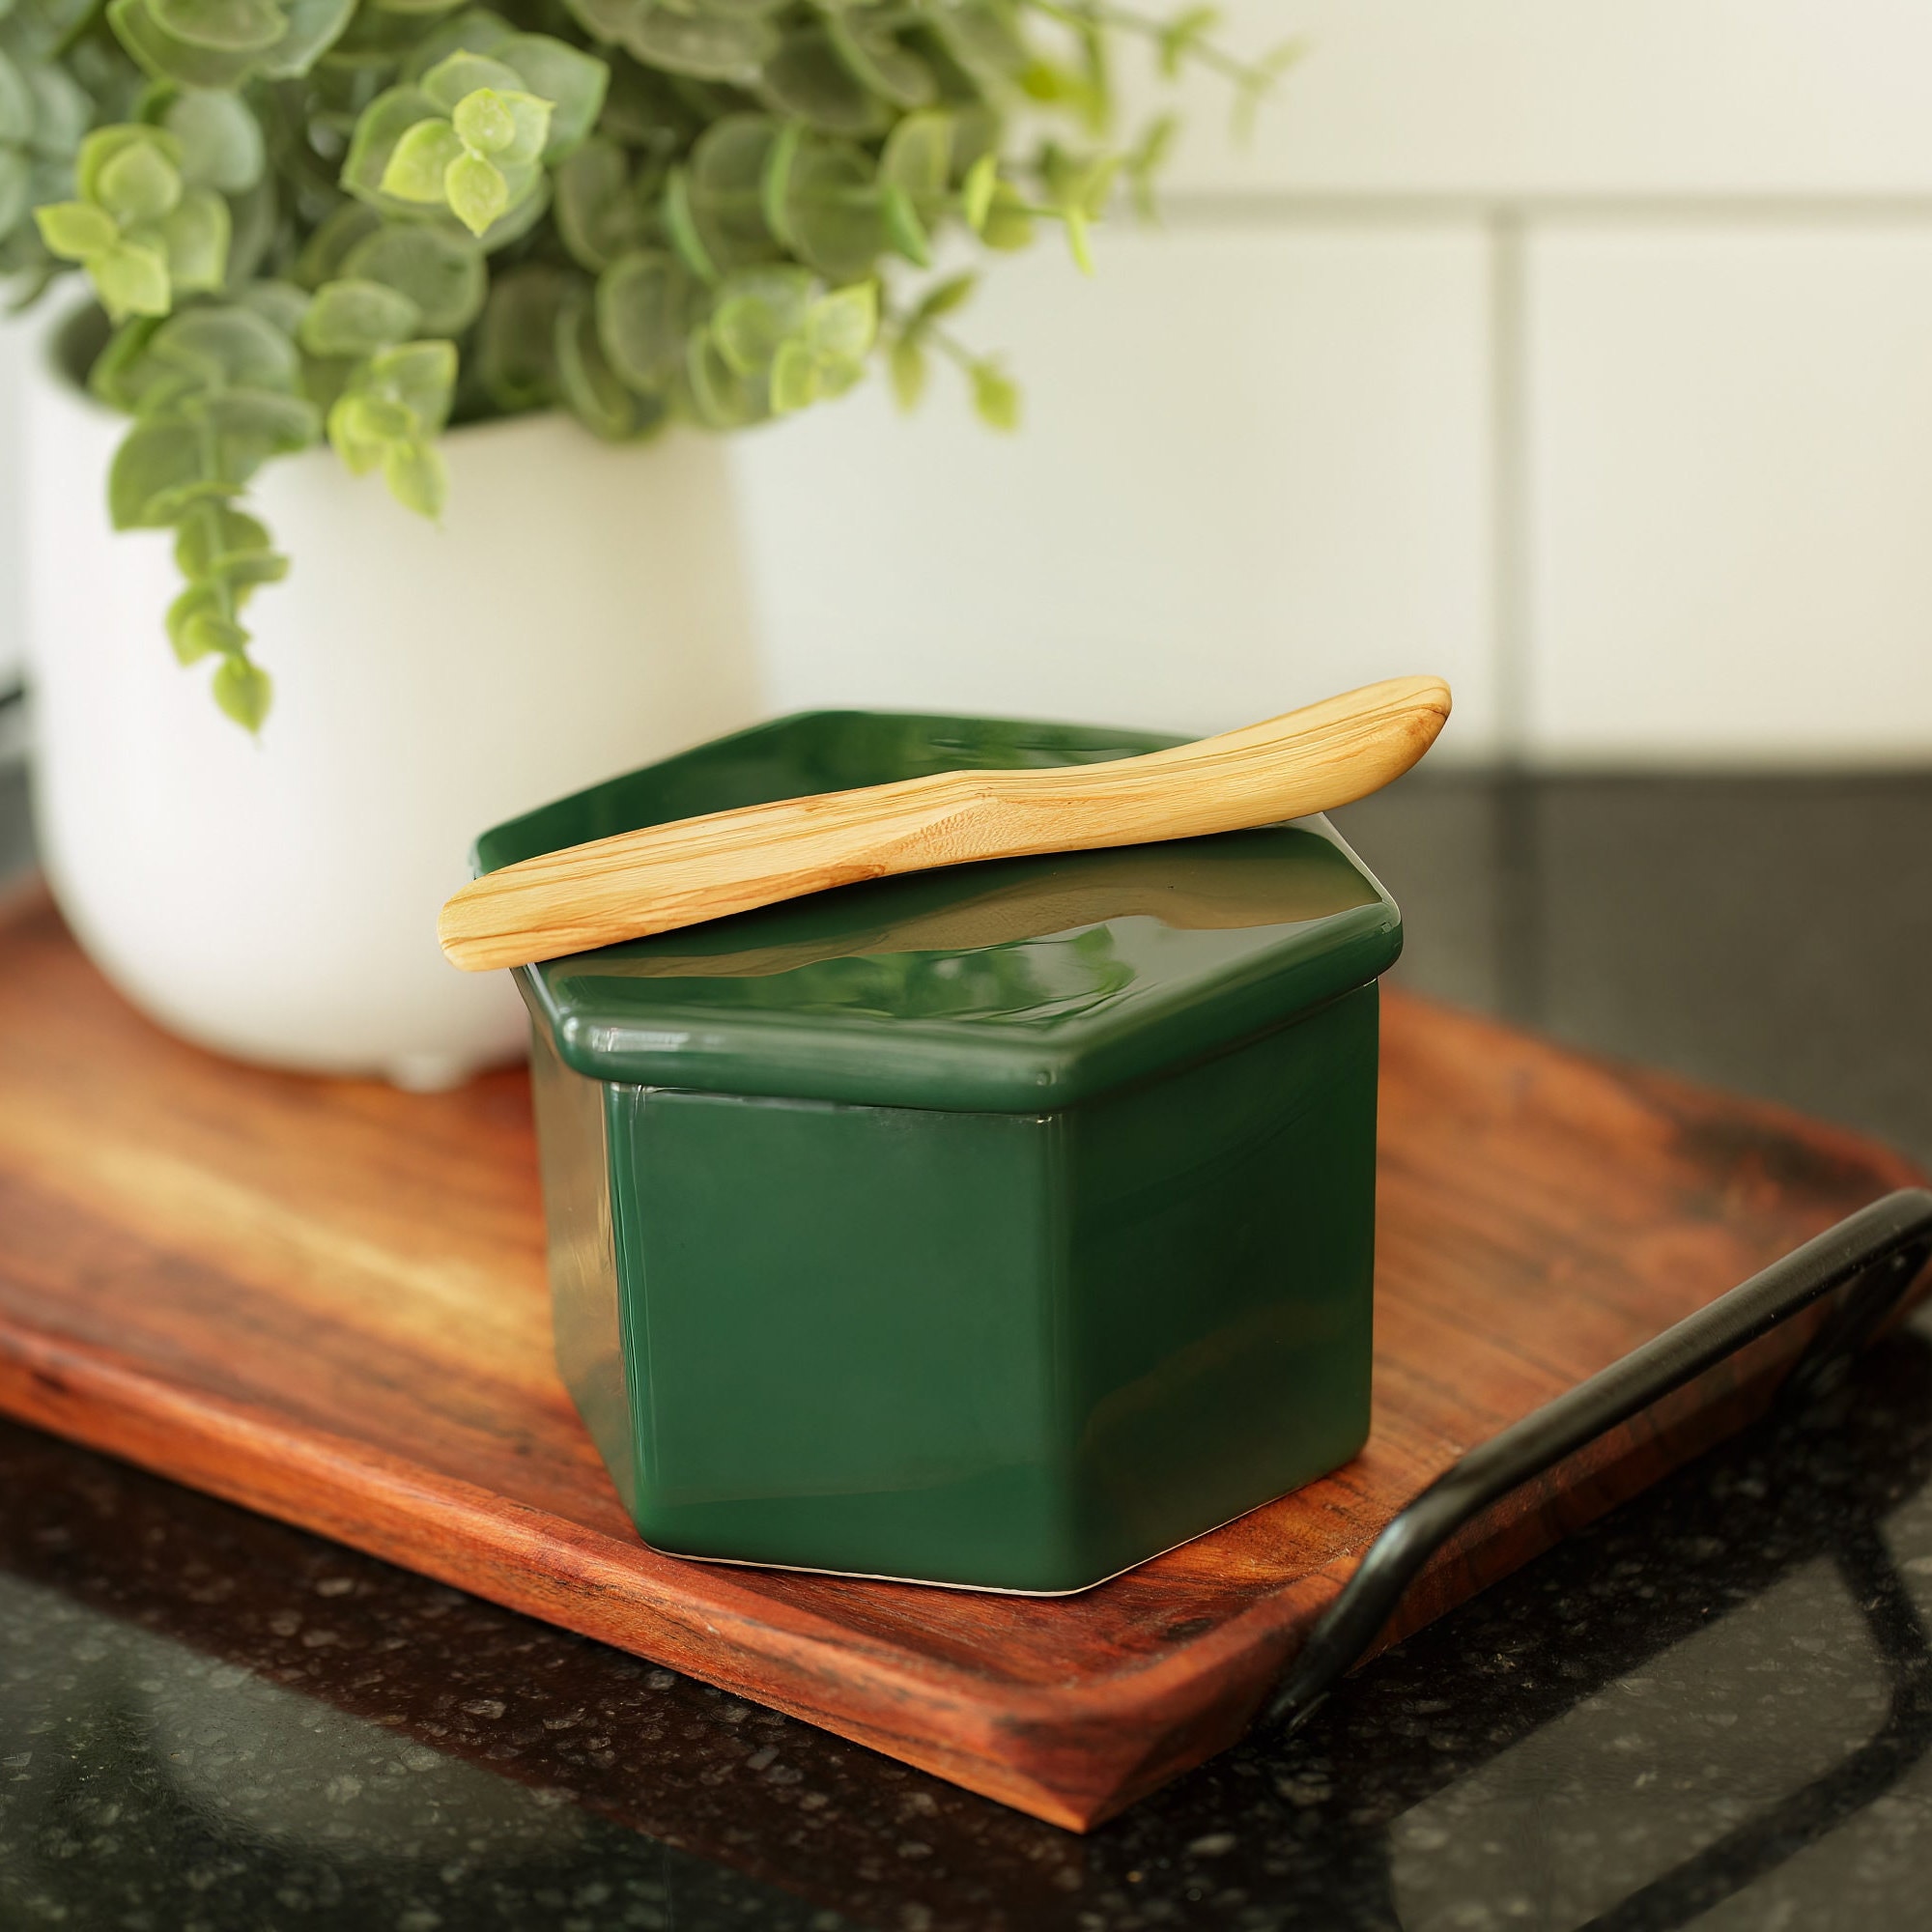 Green and Black French Butter Crock With Patterned Lid, Rustic